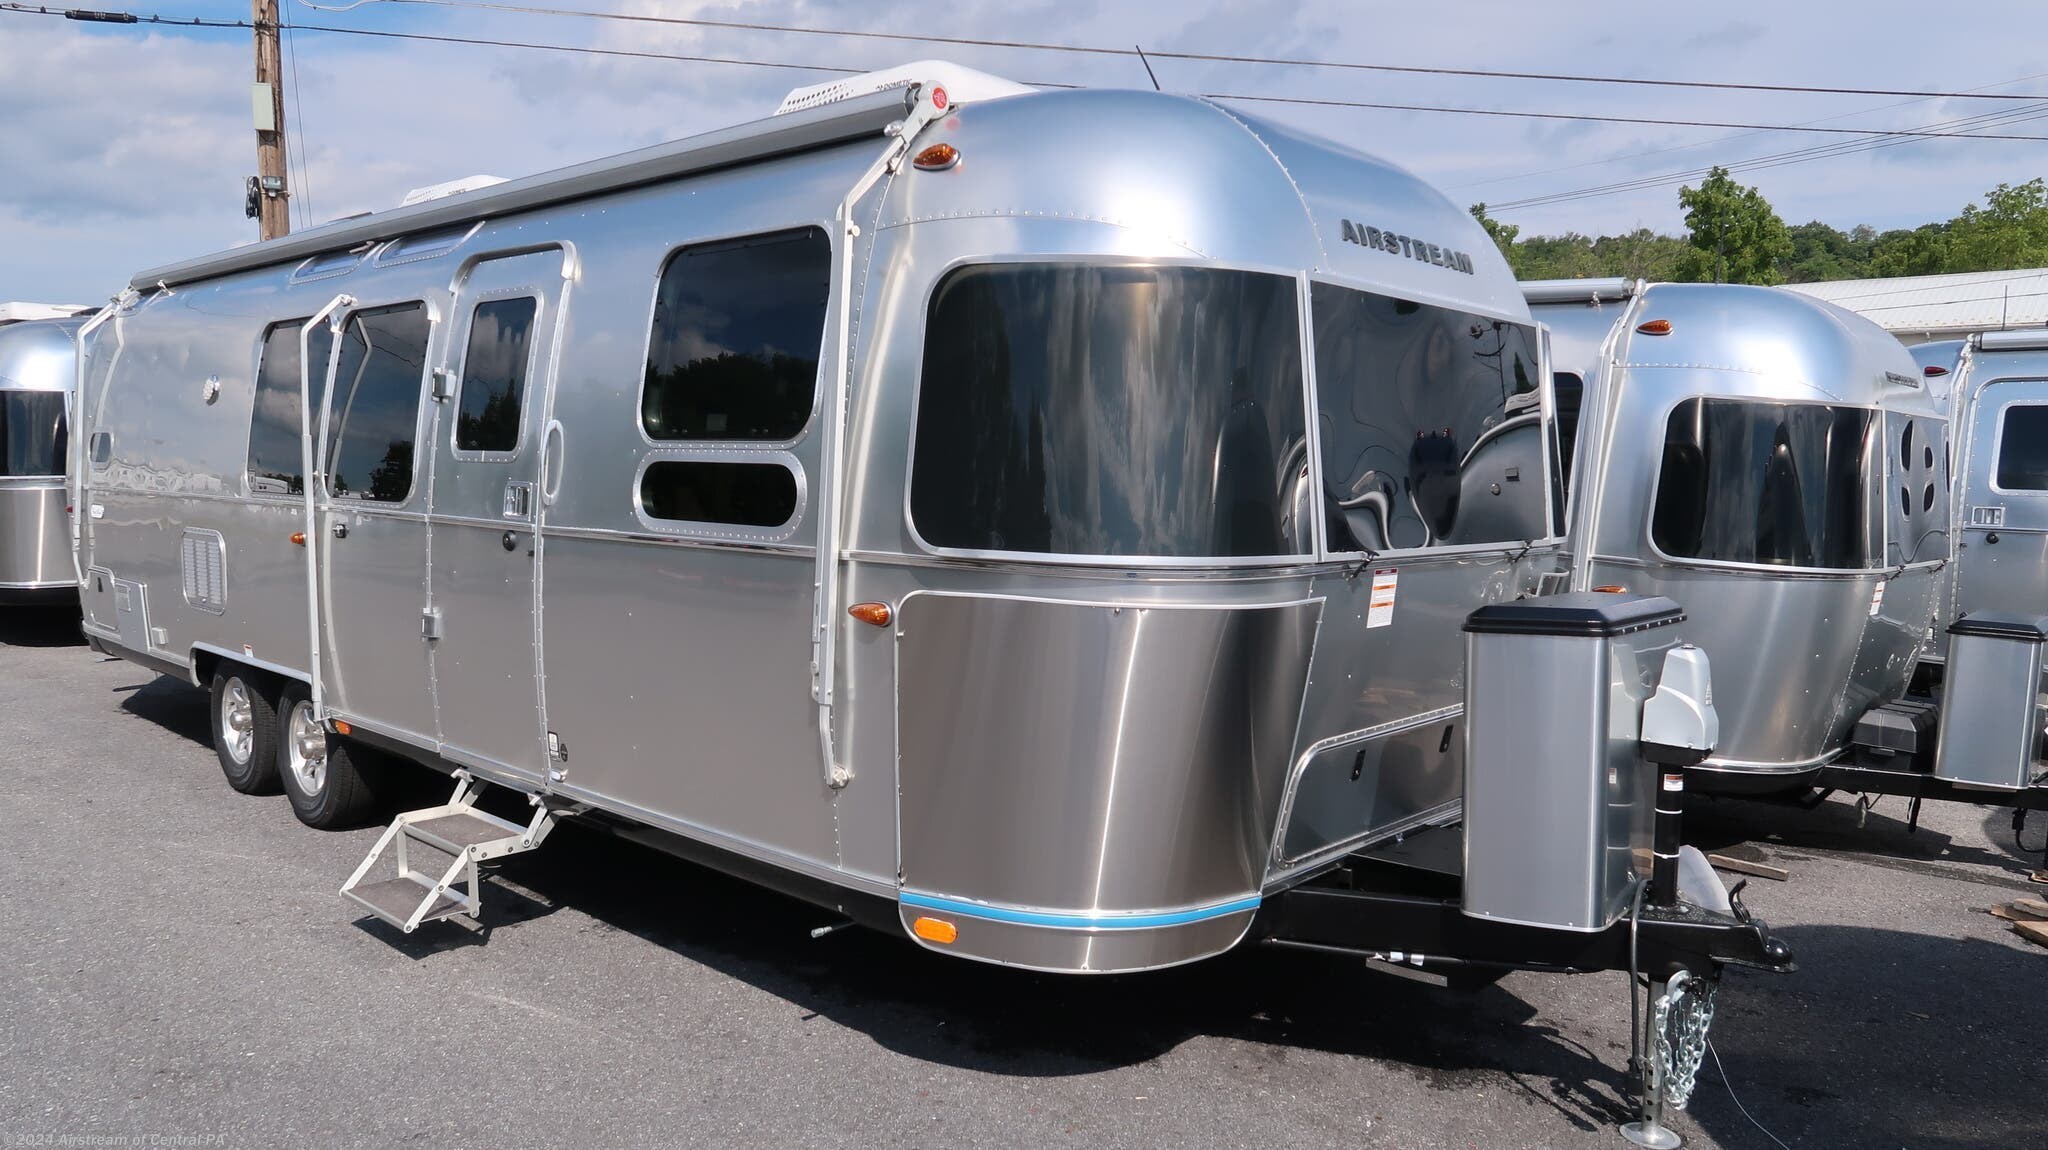 2020 Airstream RV Flying Cloud 30FB Bunk for Sale in Duncansville, PA Used Airstream Flying Cloud 30fb Bunk For Sale